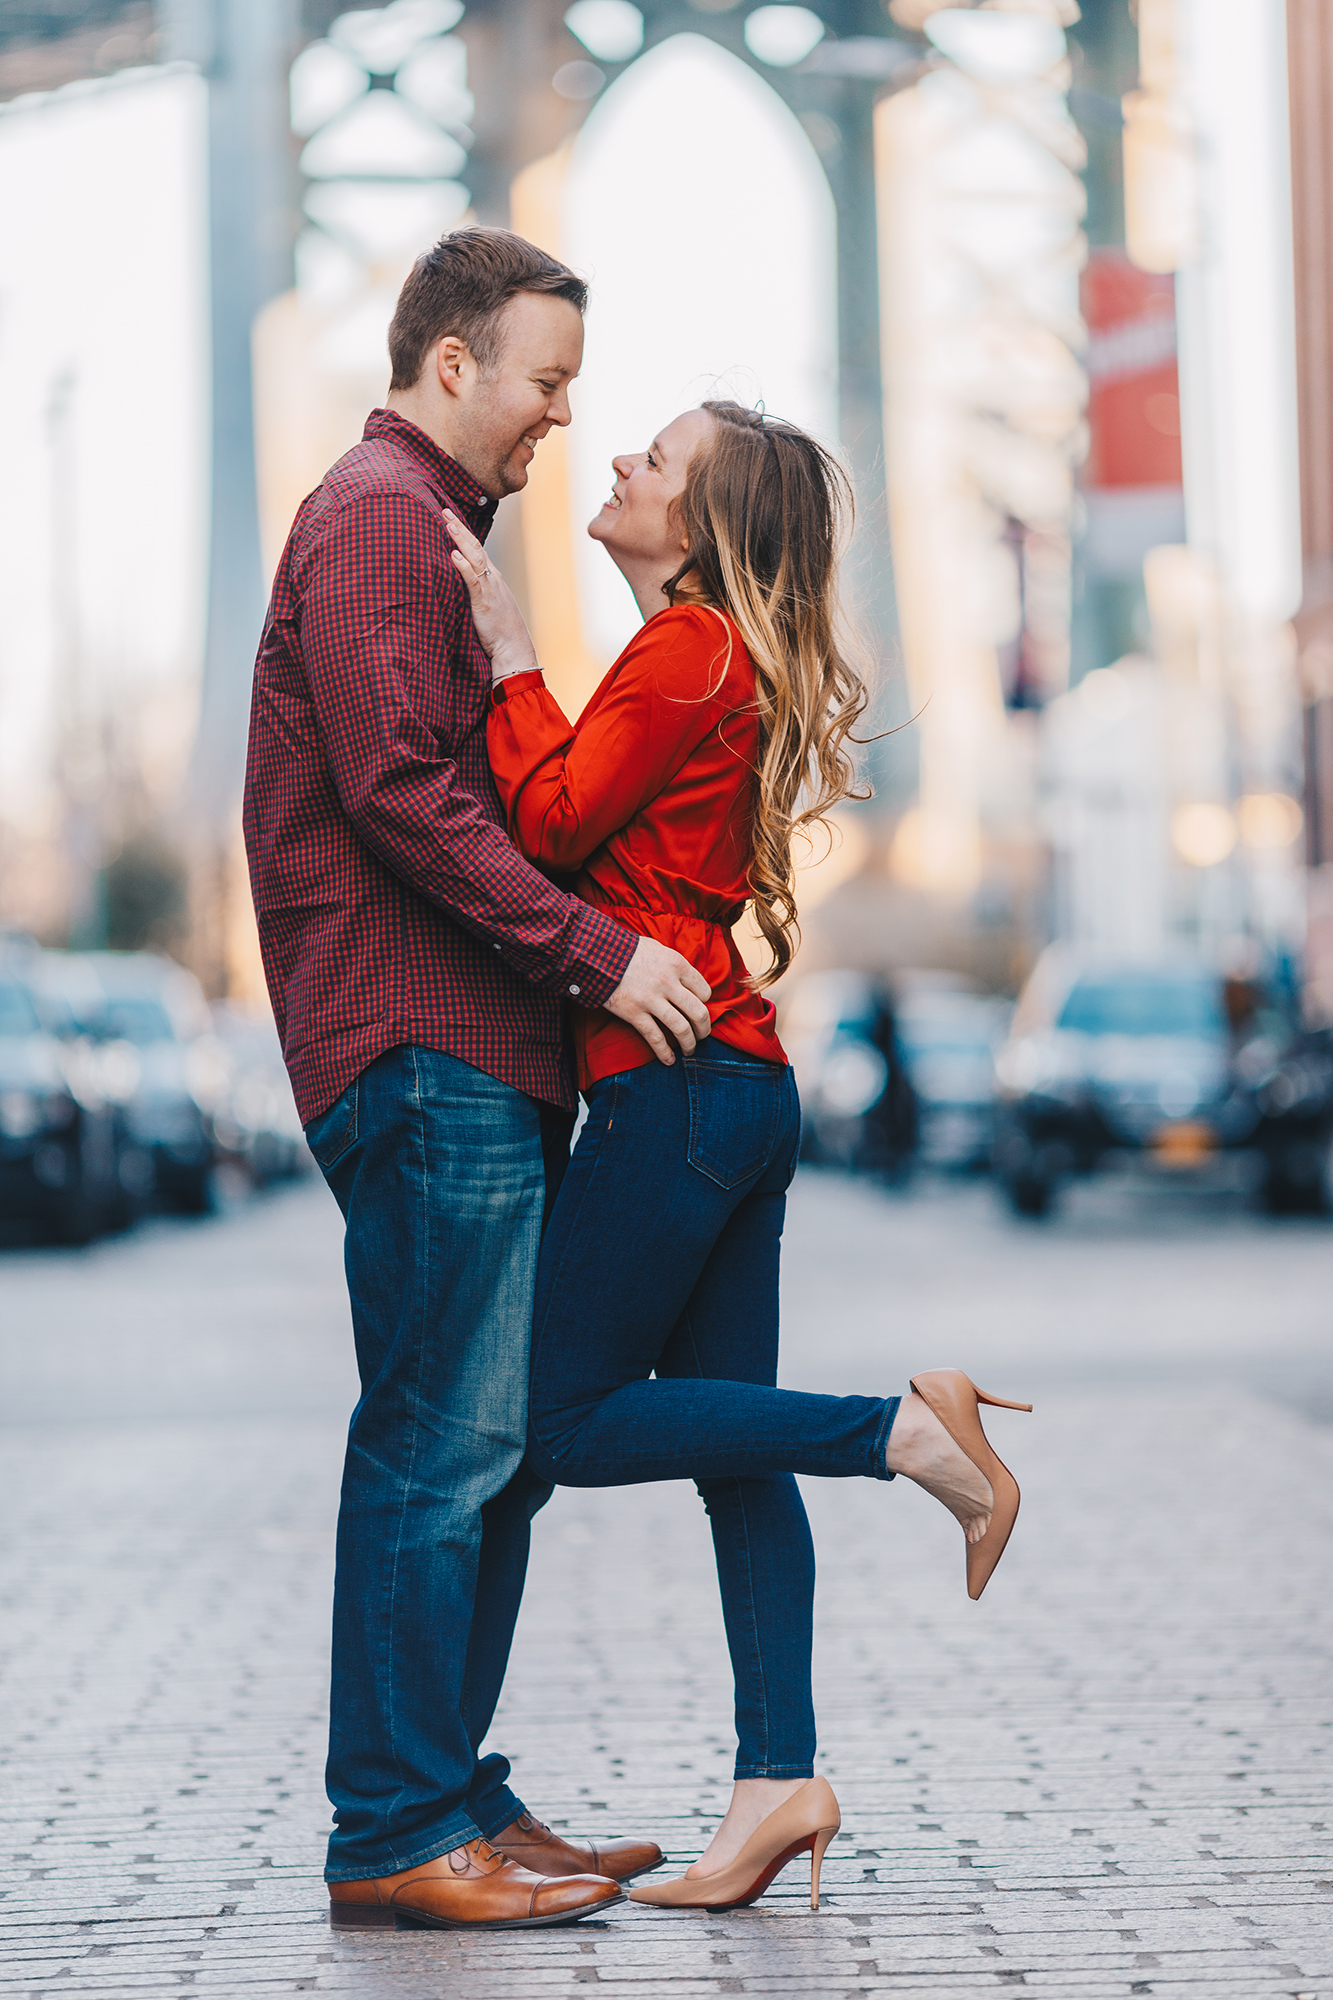 Should You Get Professional Hair & Makeup for Engagement Photos?